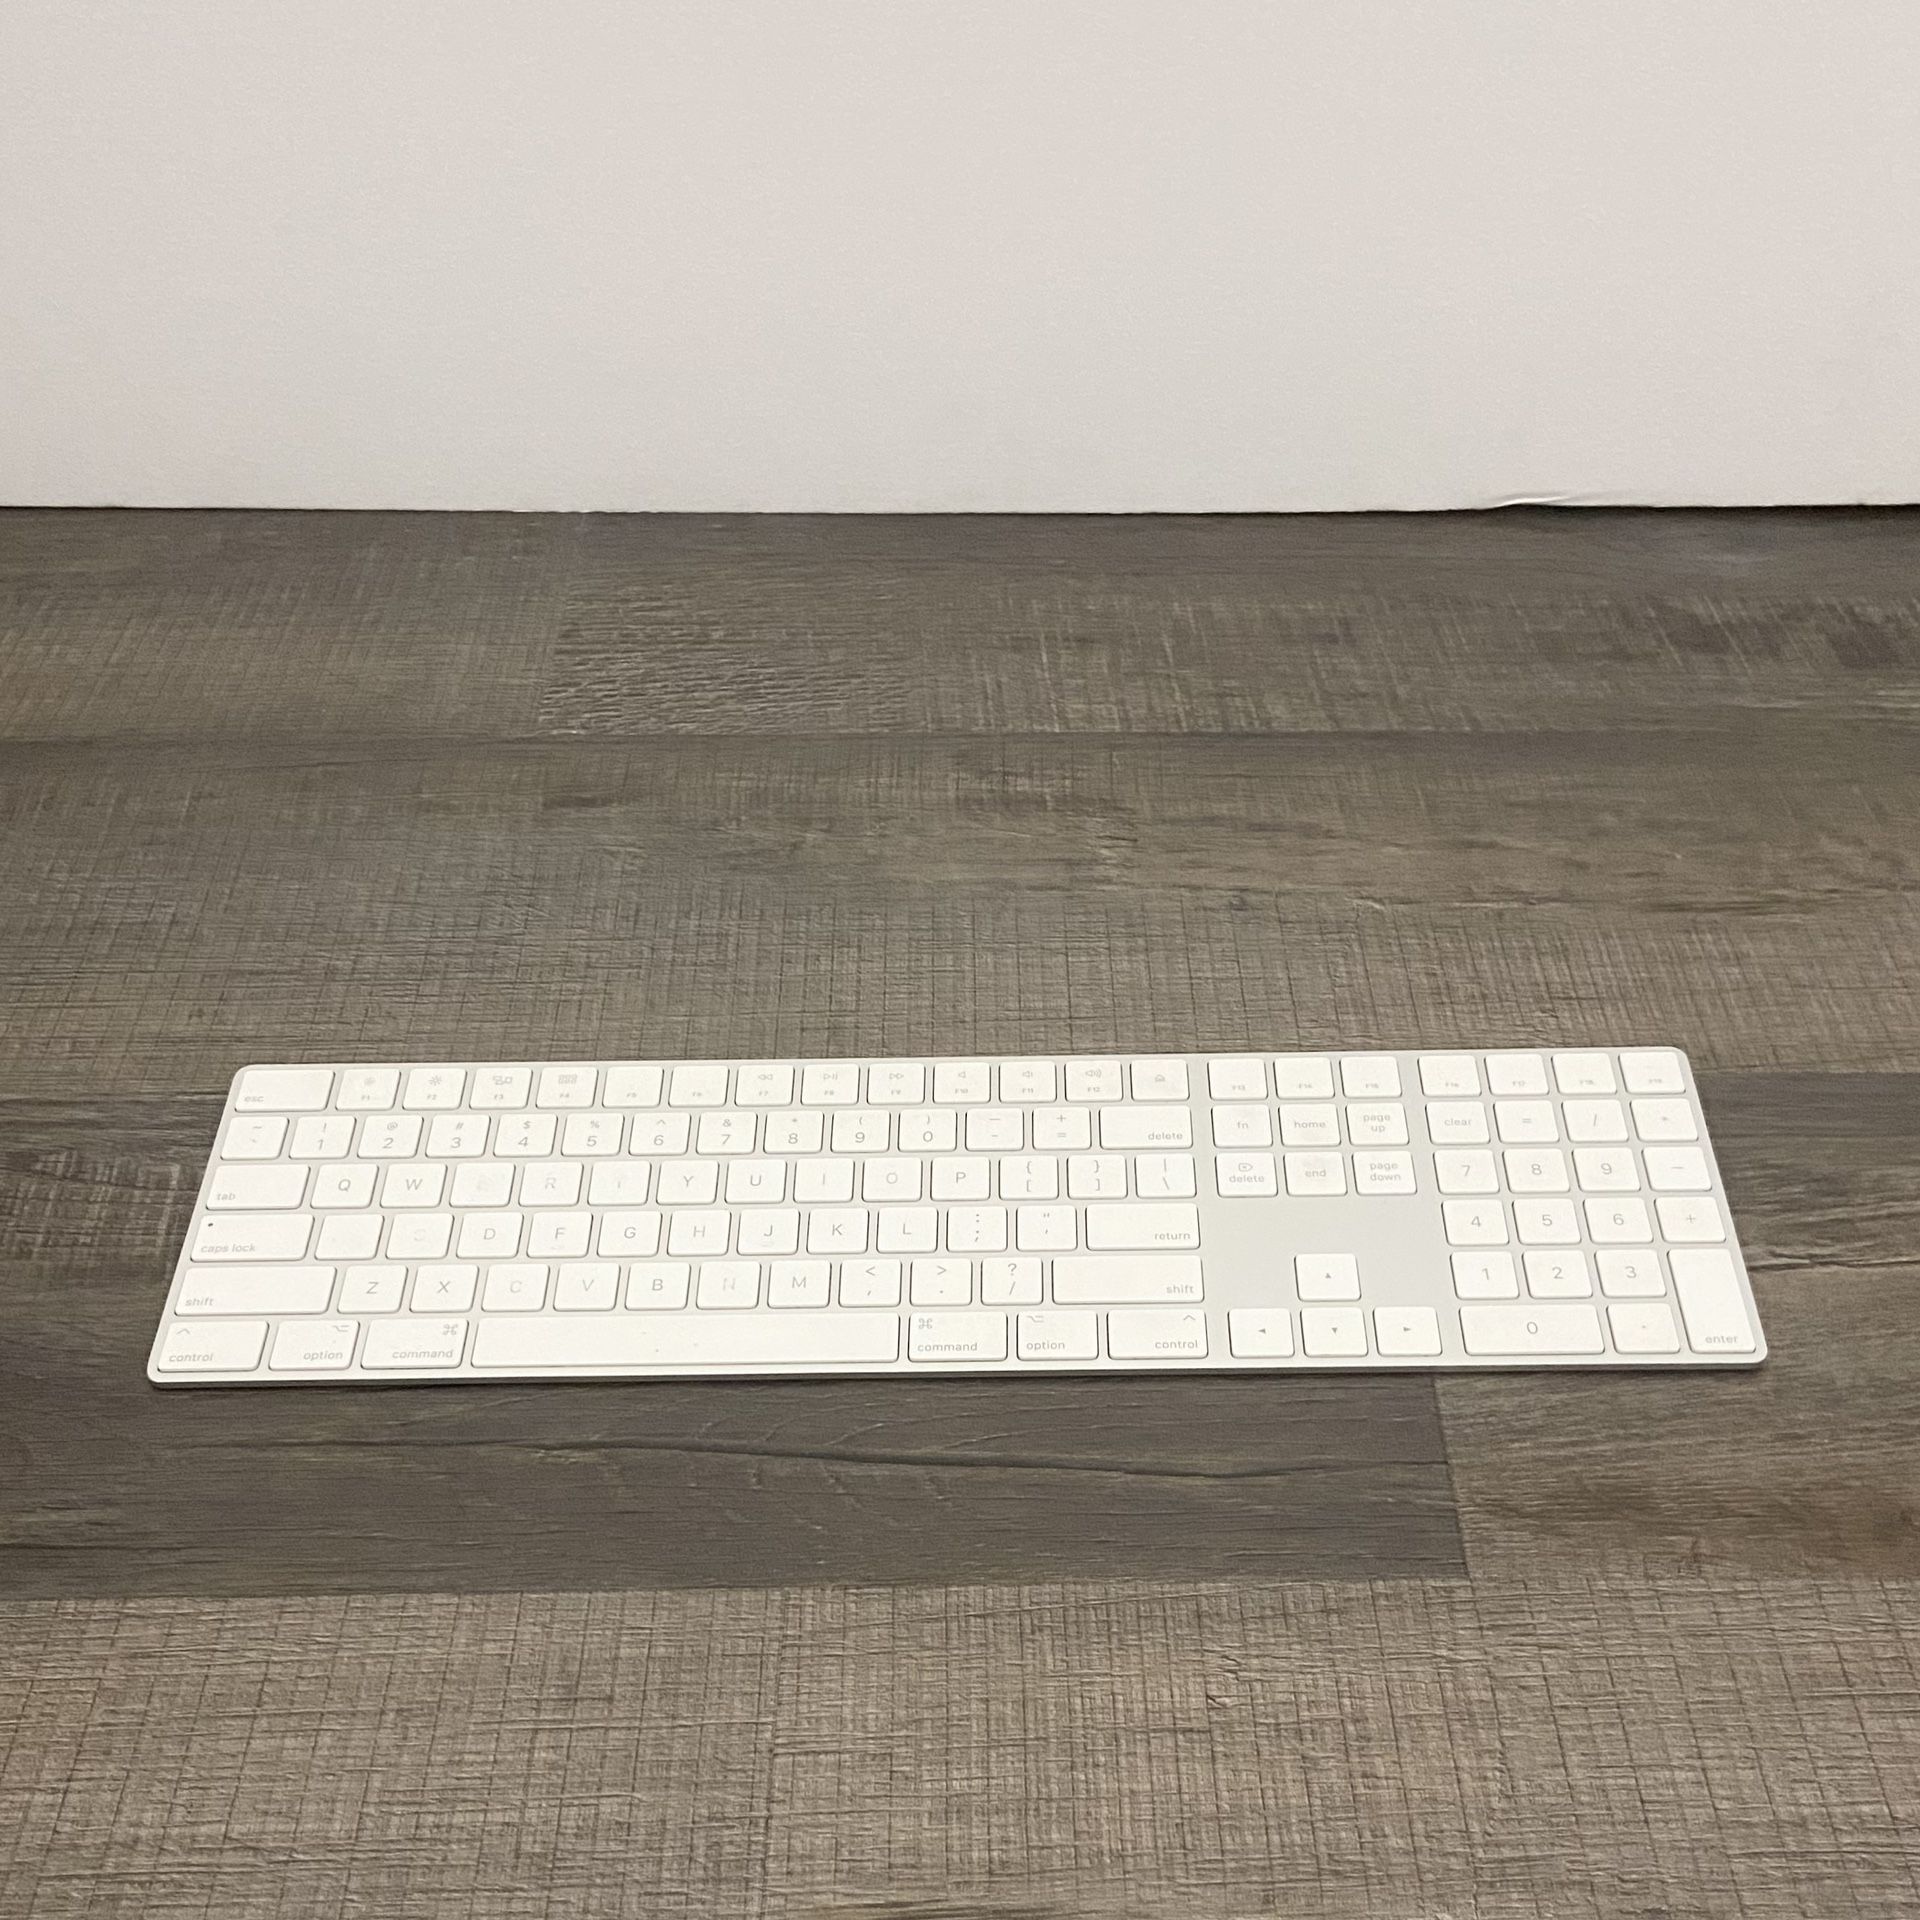 Apple Magic Keyboard with Numeric Keypad •Bluetooth •In good condition, very clean